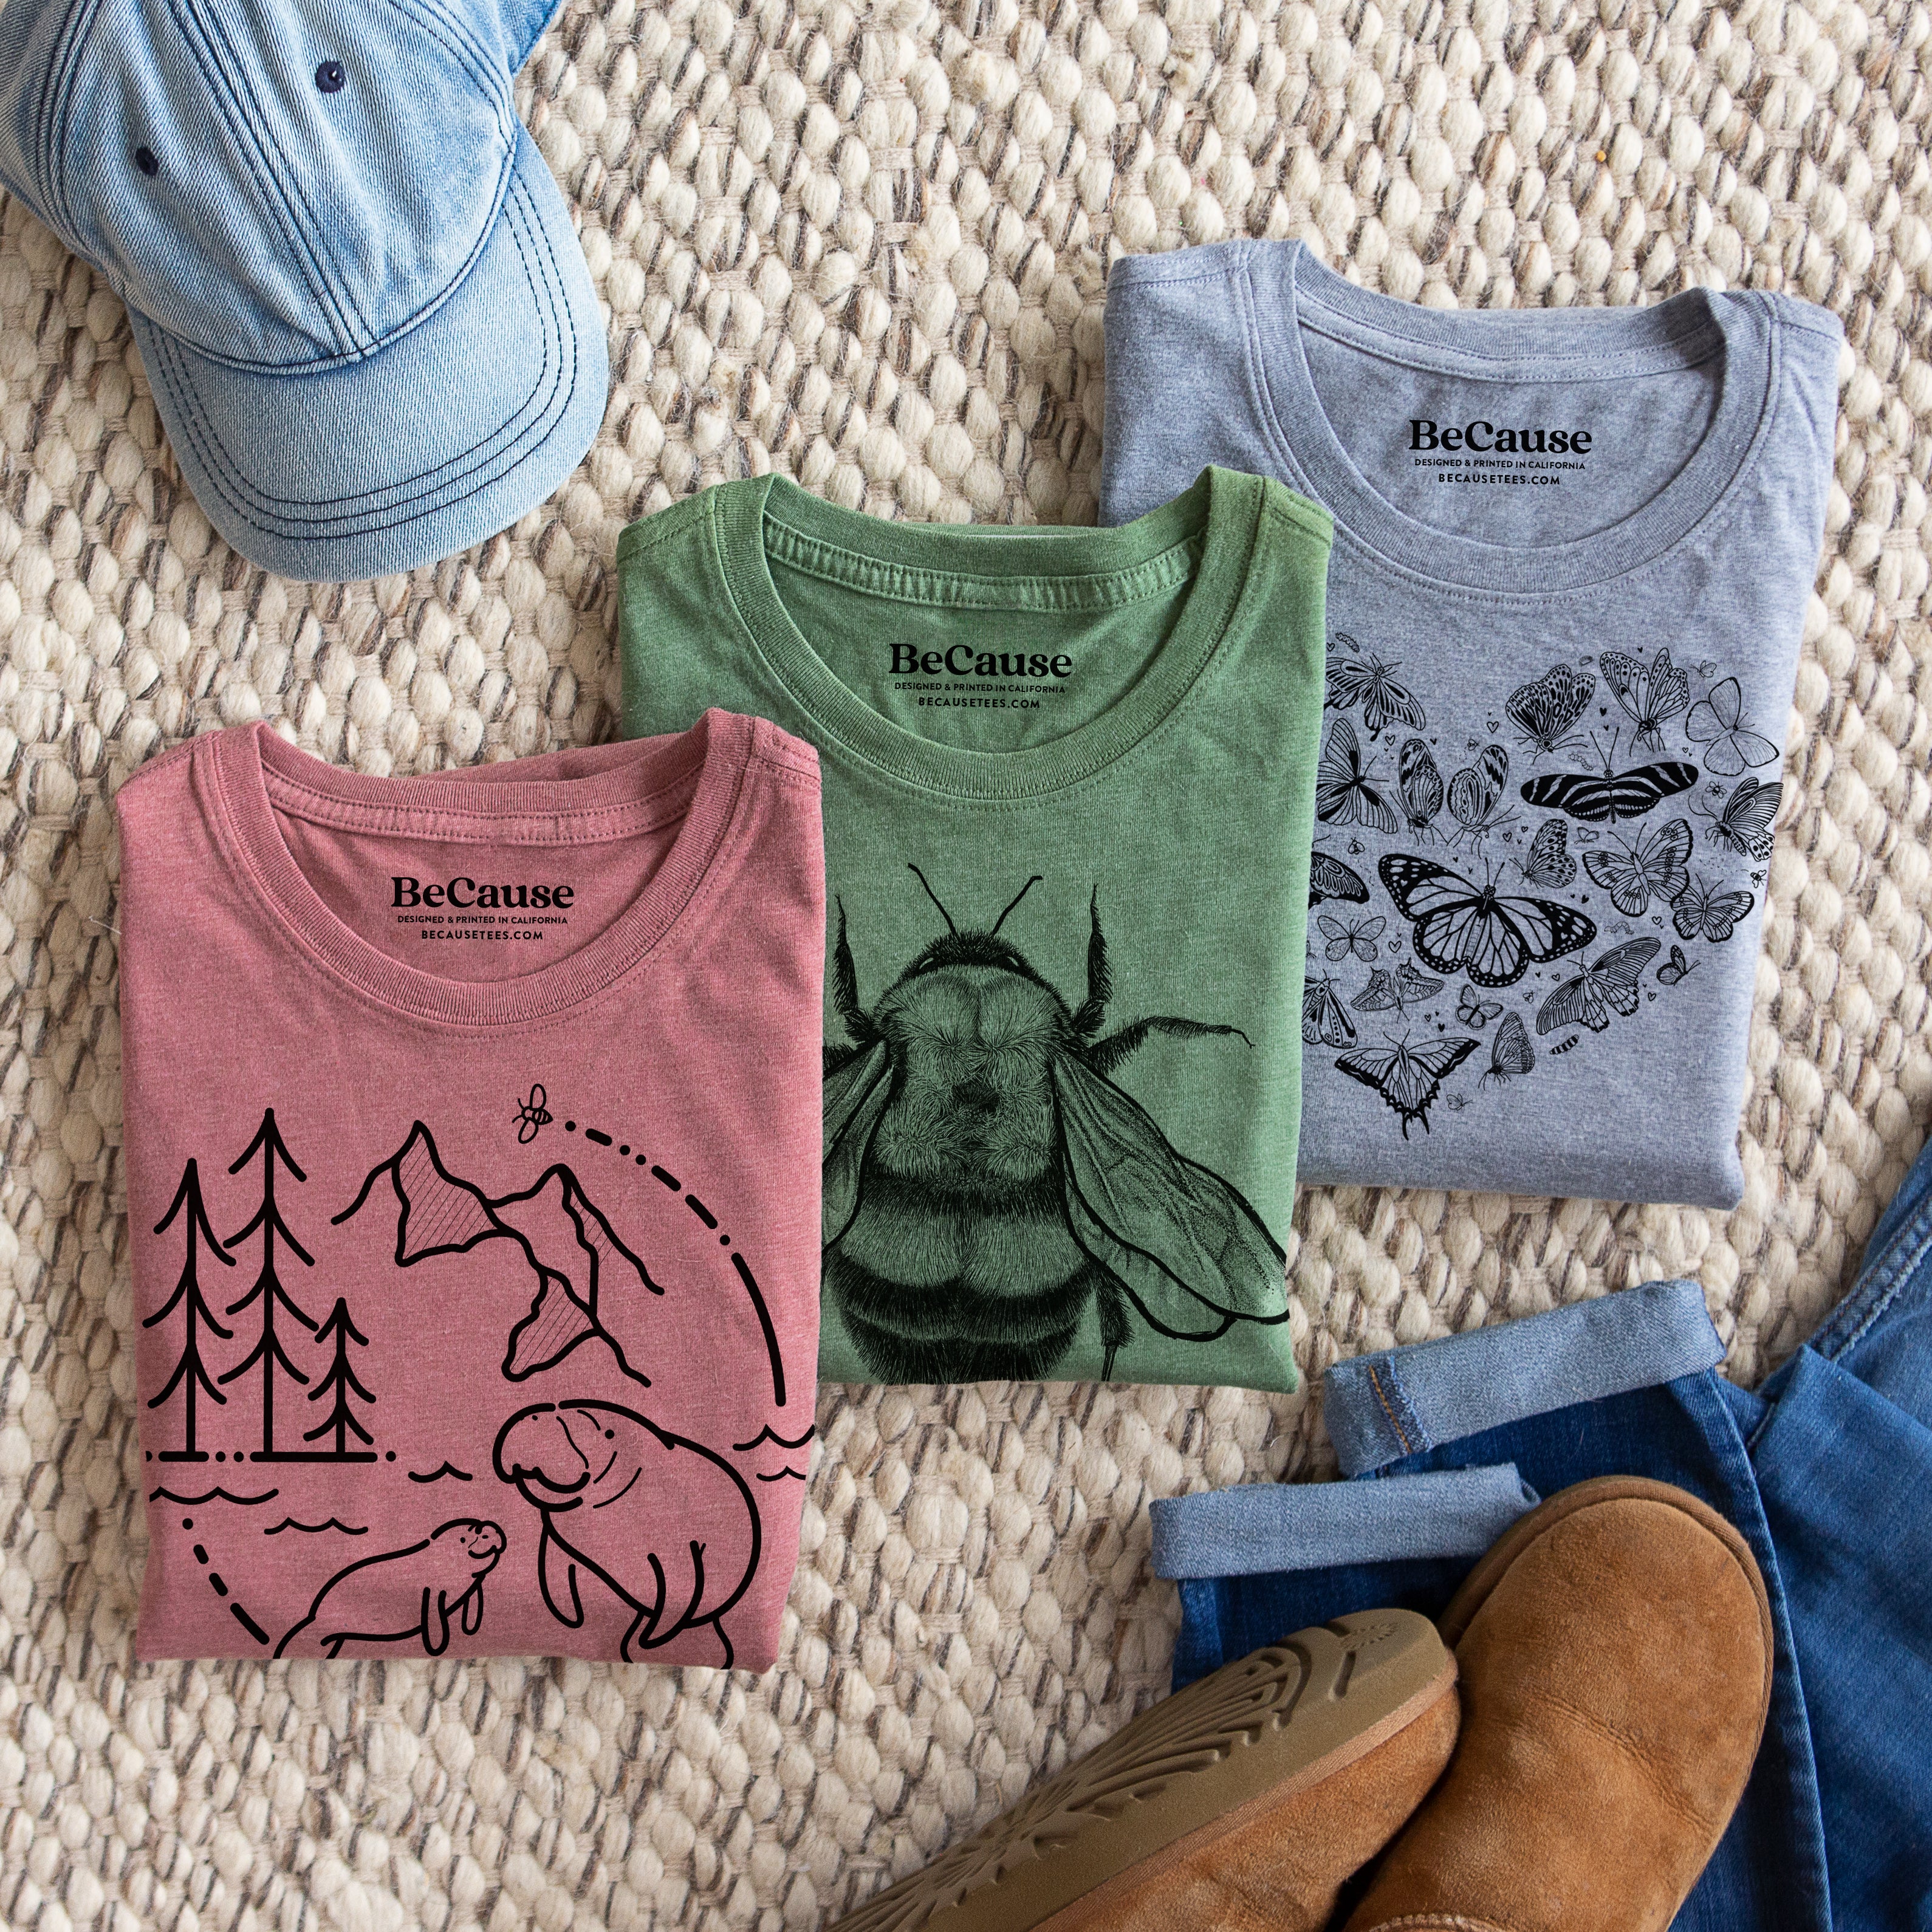 Nature shirts with hand-drawn designs